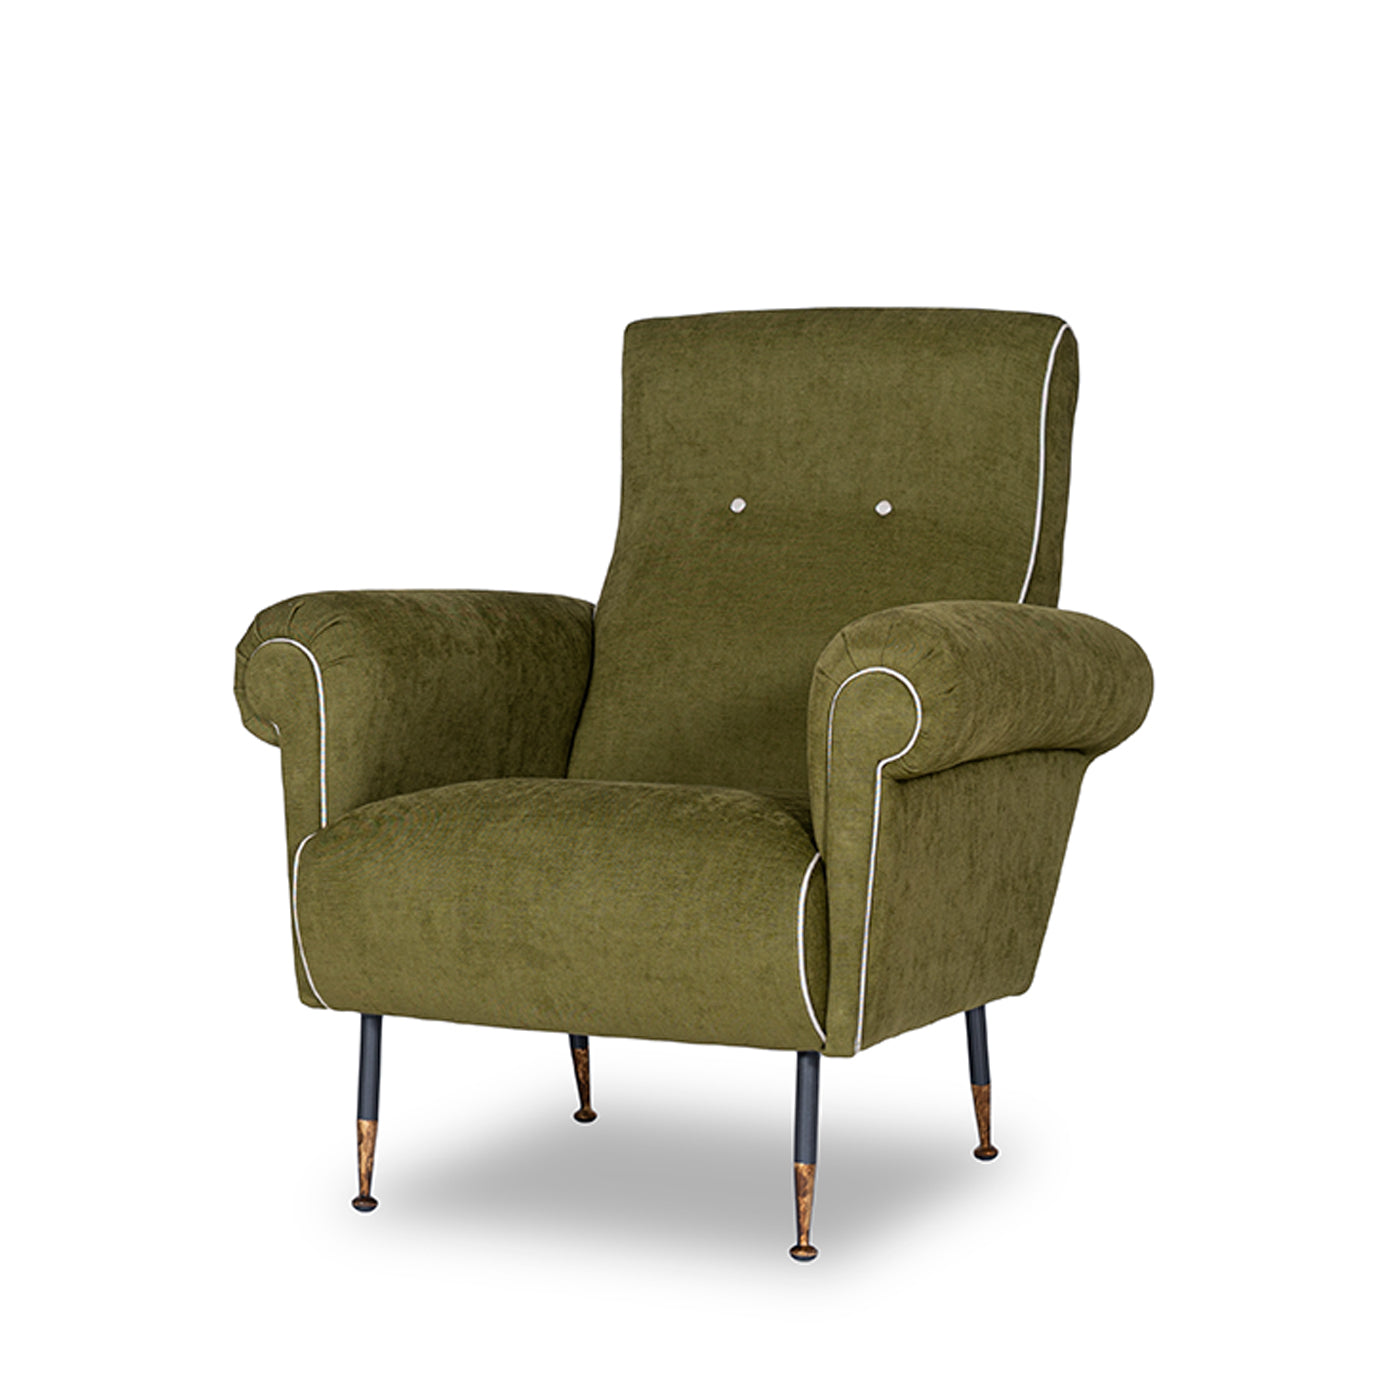 Pulce Armchair Tribeca Collection - Alternative view 1